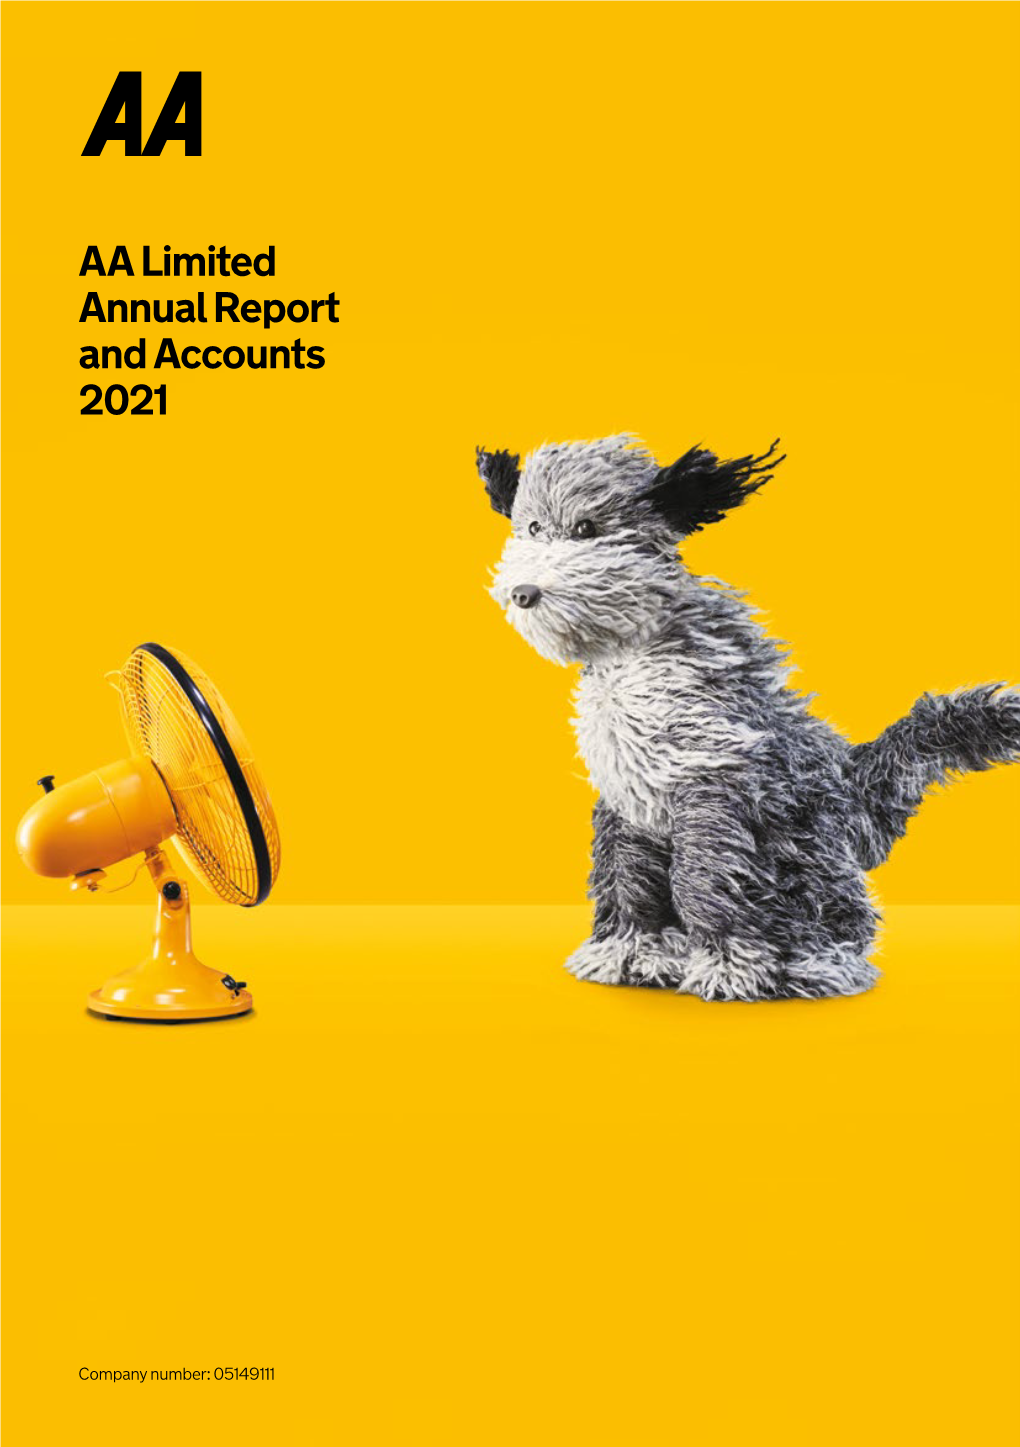 AA Limited Annual Report and Accounts 2021